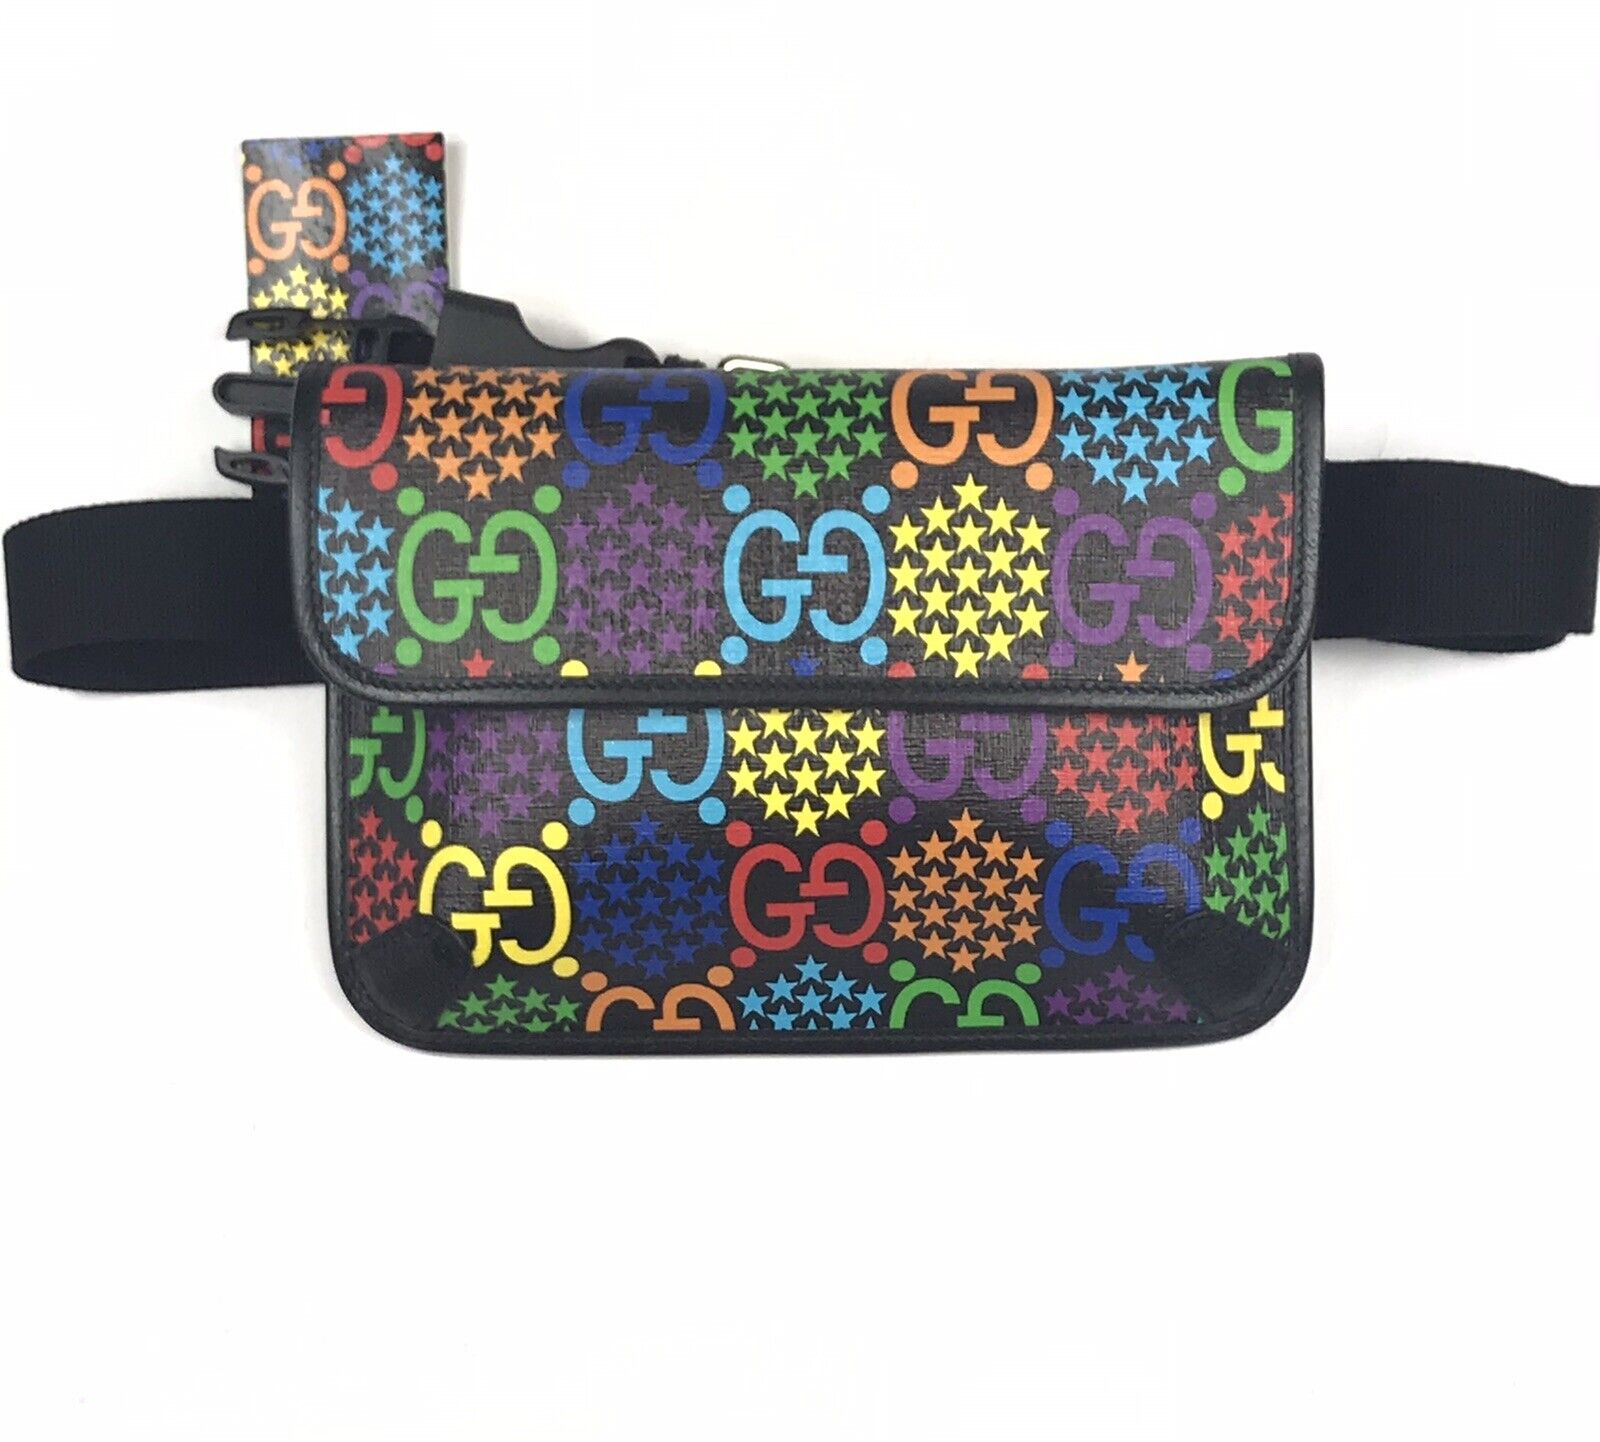 Gucci #598113 GG Supreme Psychedelic Belt Bag, New in Box 